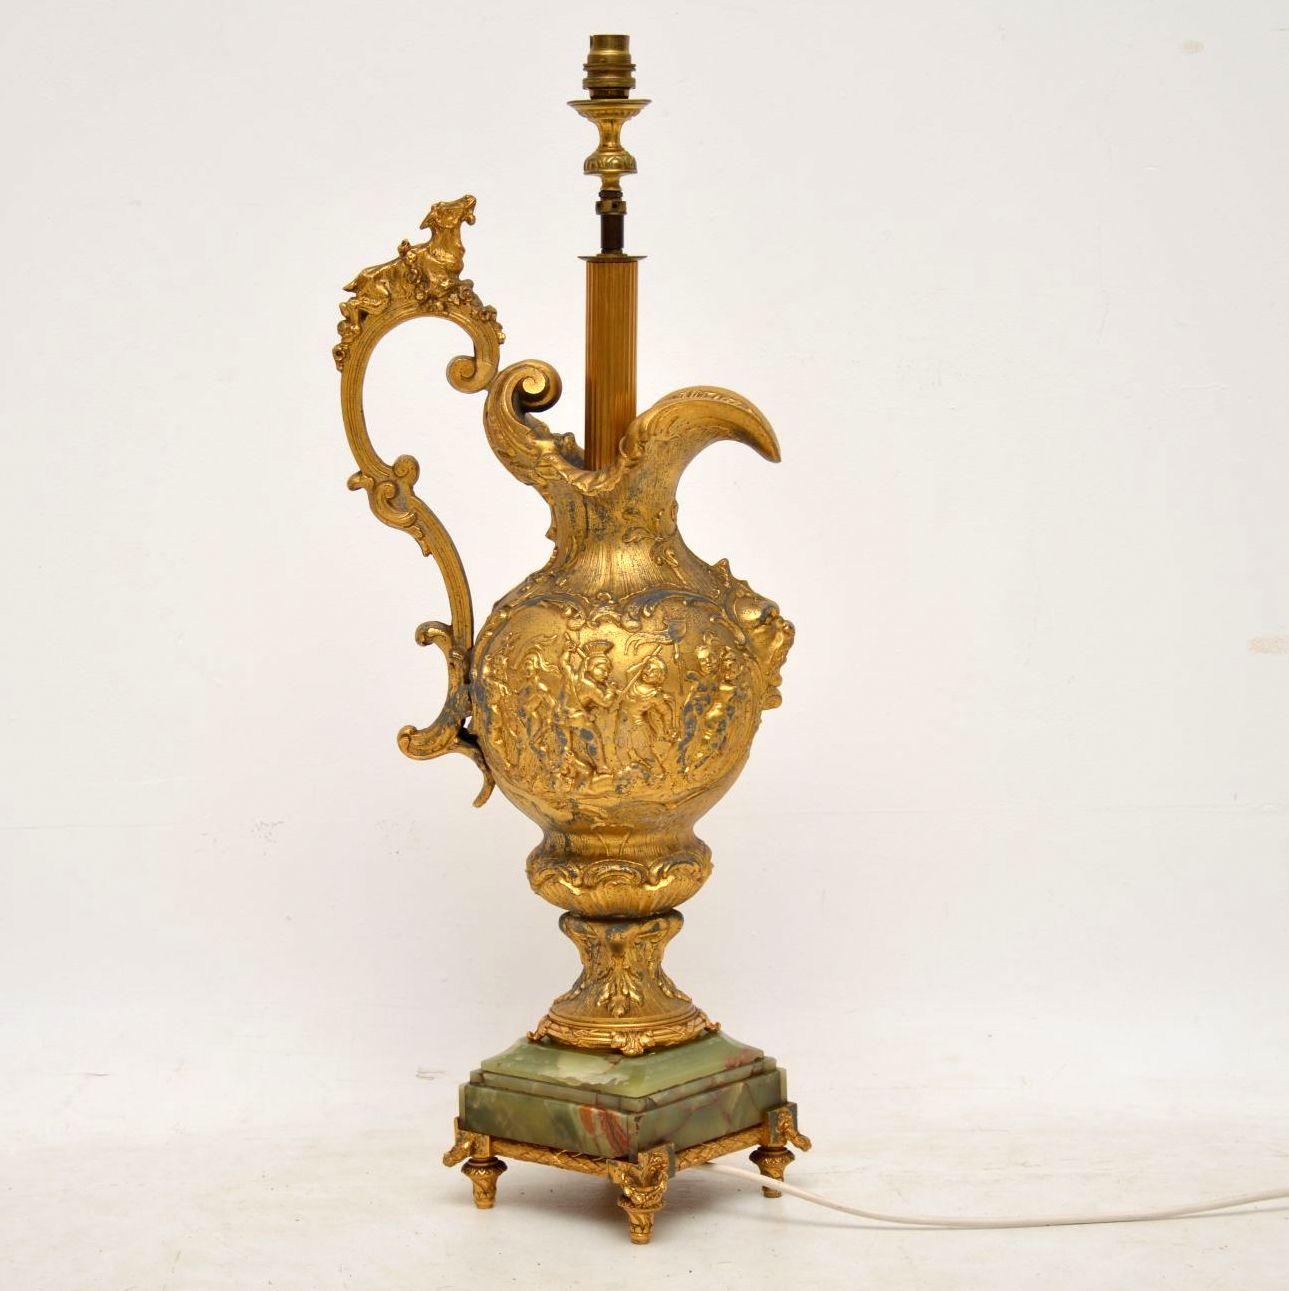 Large antique gilt metal lamp in the form of an embossed flagon with many fine details & sitting on an onyx base with gilt feet.

The gilding has a soft gold color & has been cleaned a bit but still could be cleaned more, if wished. I like it as